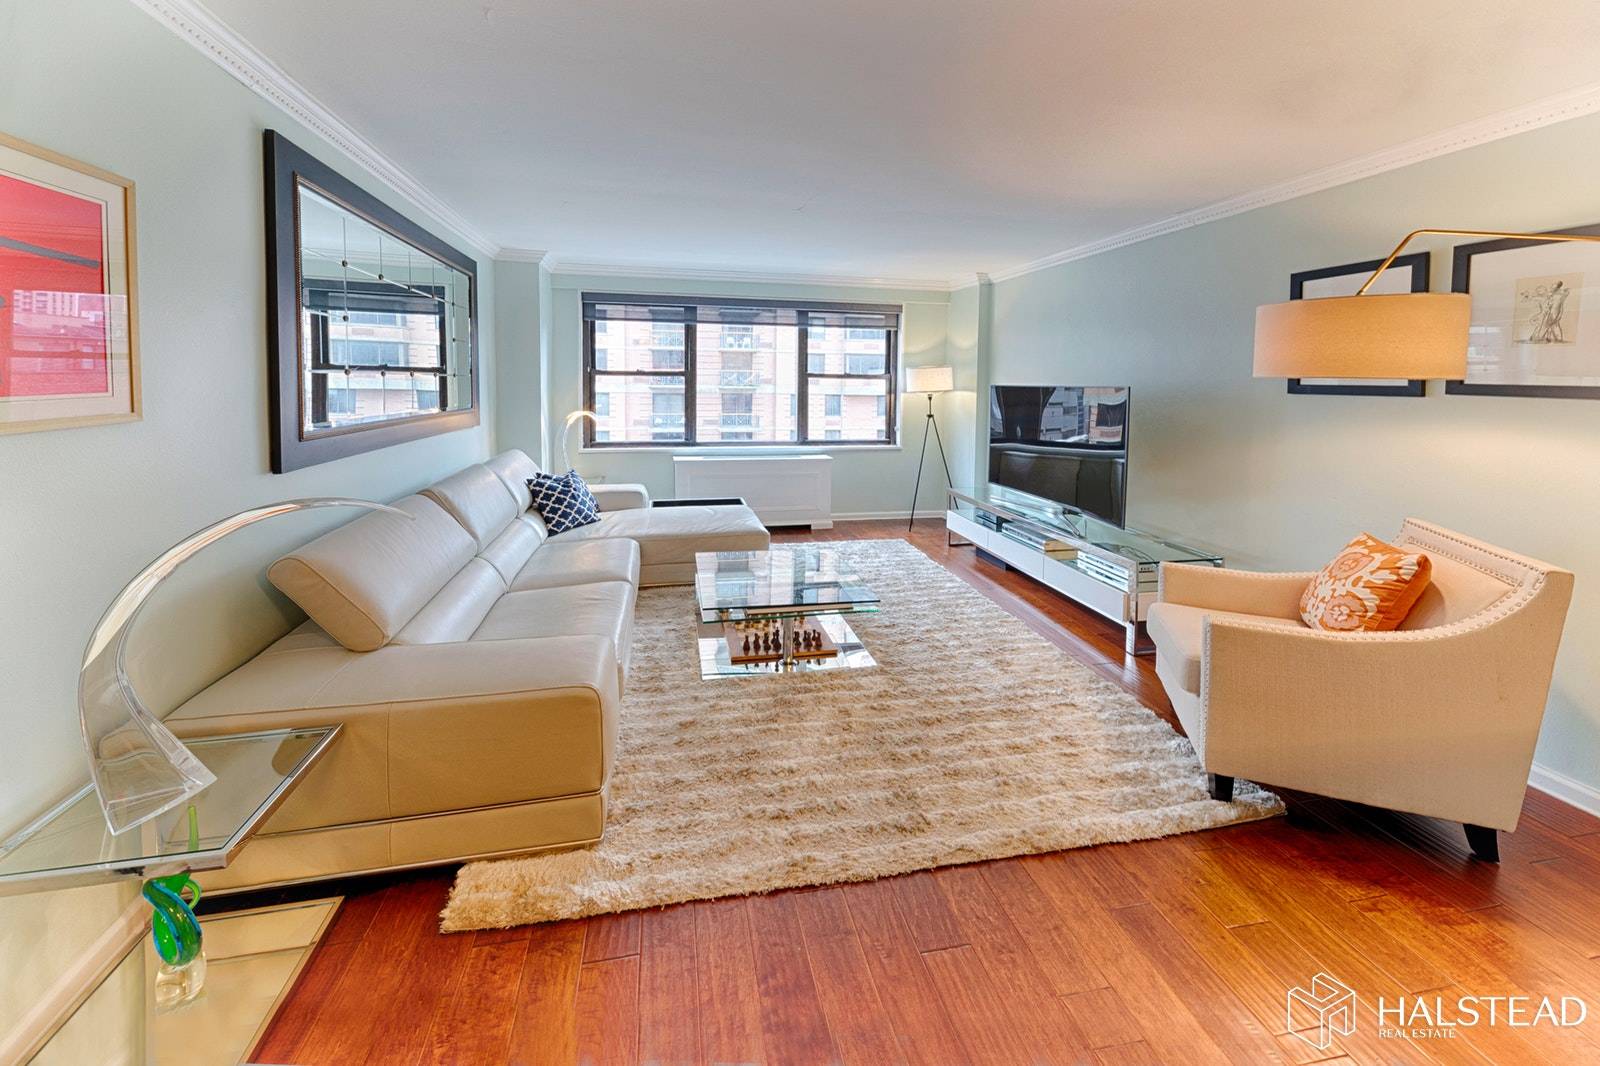 Imagine your future in this spacious, beautifully renovated 1 bedroom, 1 bath home.